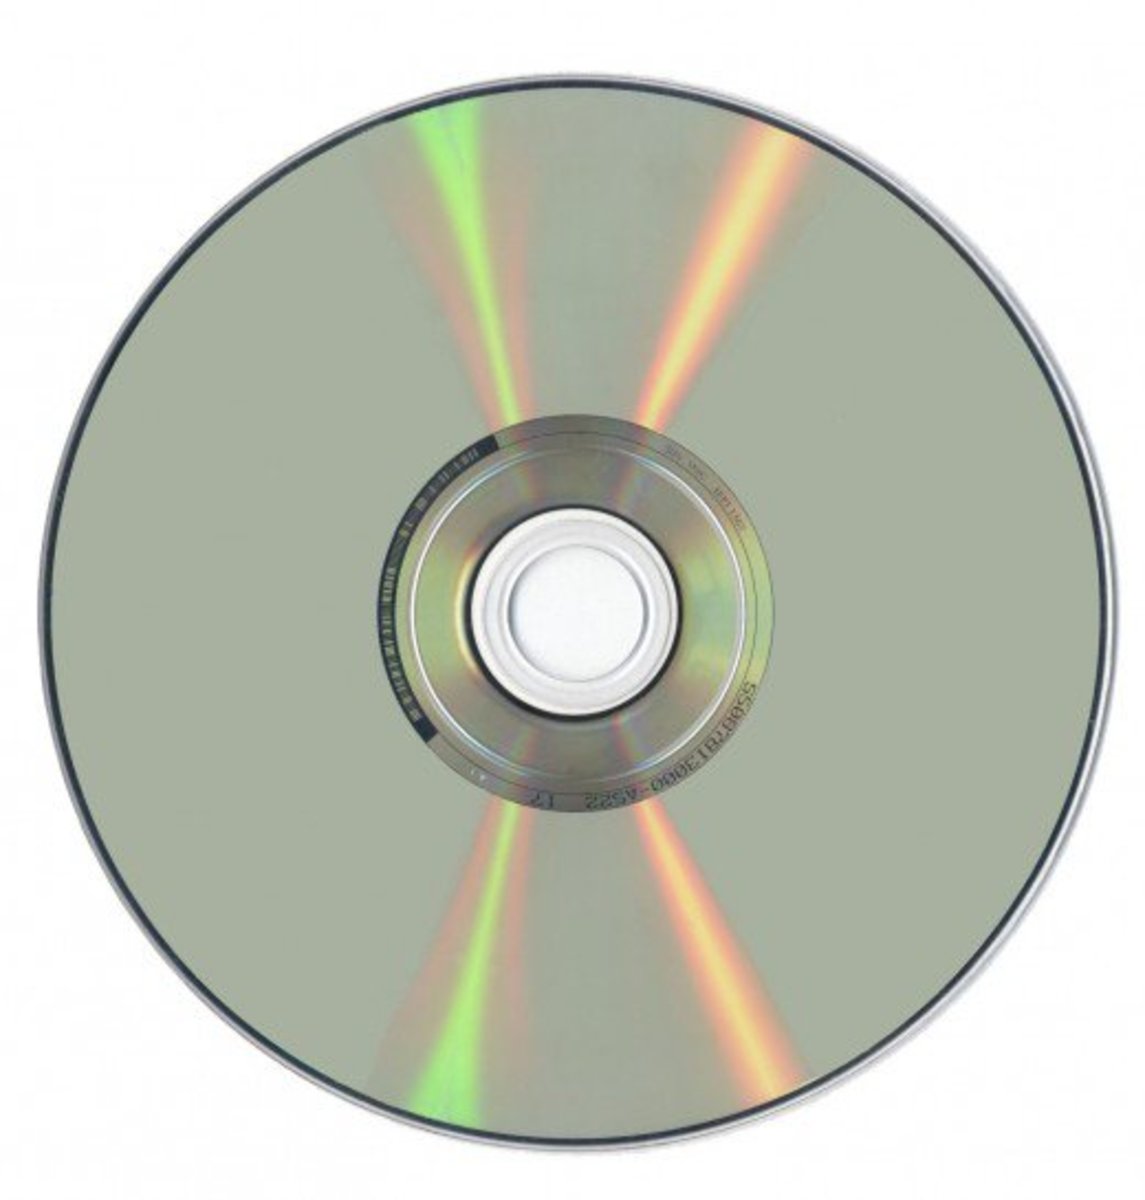 Even in the age of the internet, DVDs are still an excellent way of viewing movies and TV shows on long journeys. They can also hold games. With a disc you have none of the connectivity issues that you can encounter with streaming when on the move.